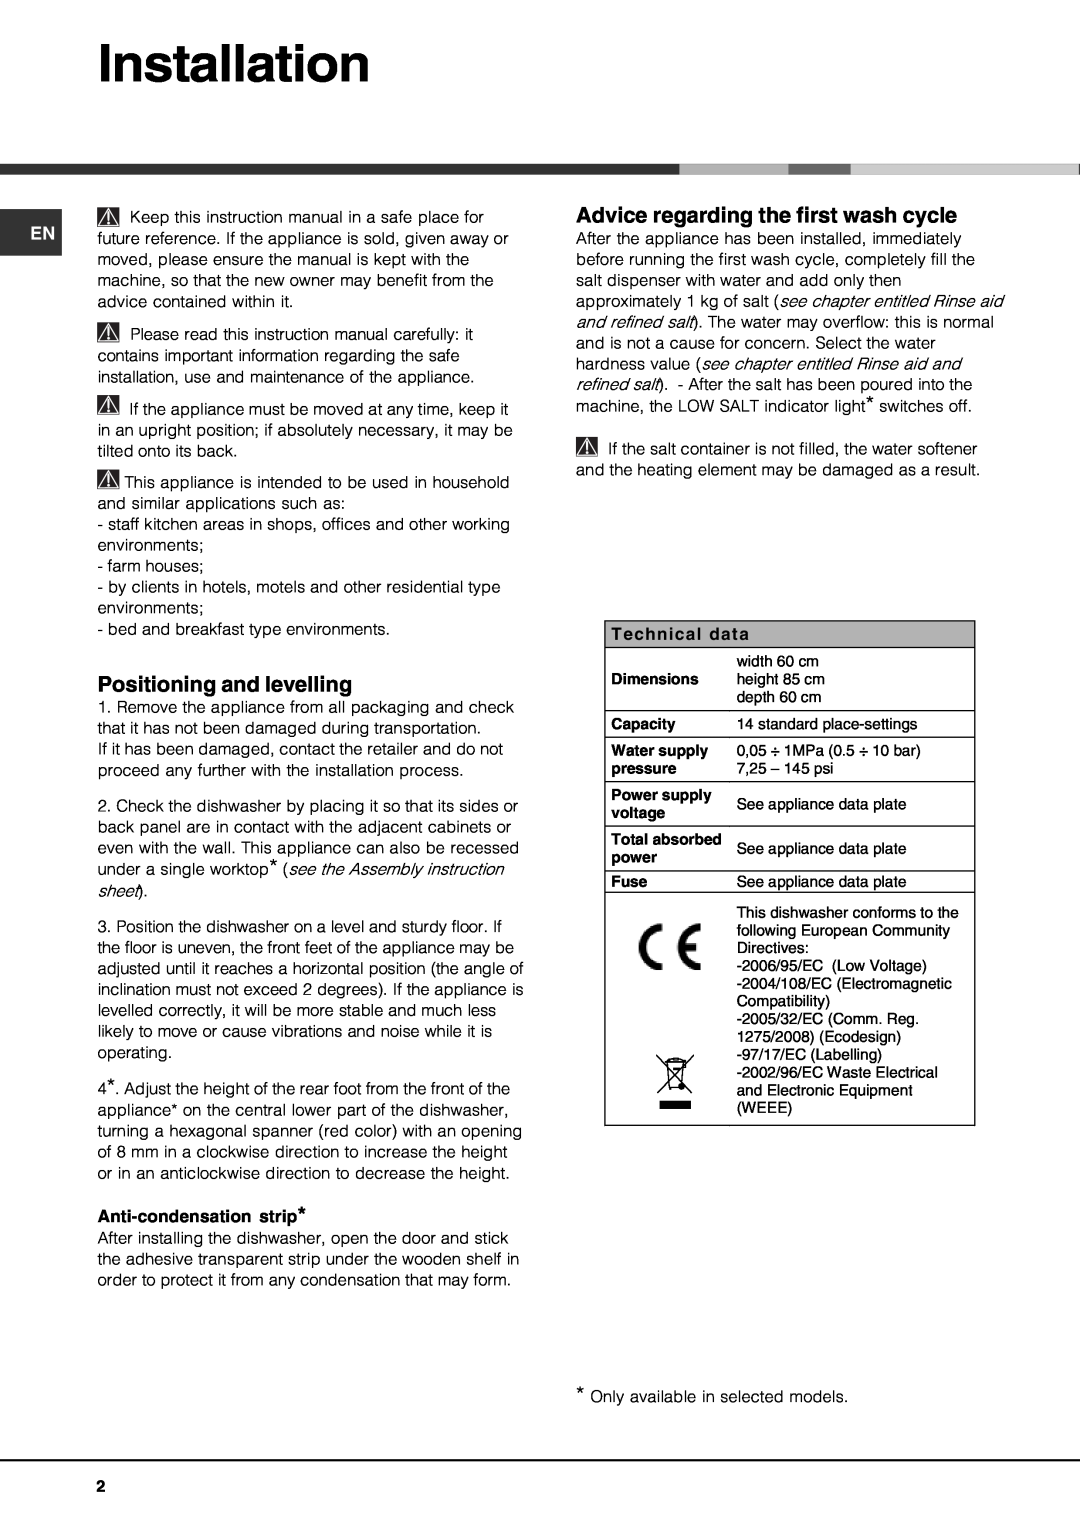 Hotpoint FDPF 481 manual Installation, Positioning and levelling, Advice regarding the first wash cycle, Technical data 